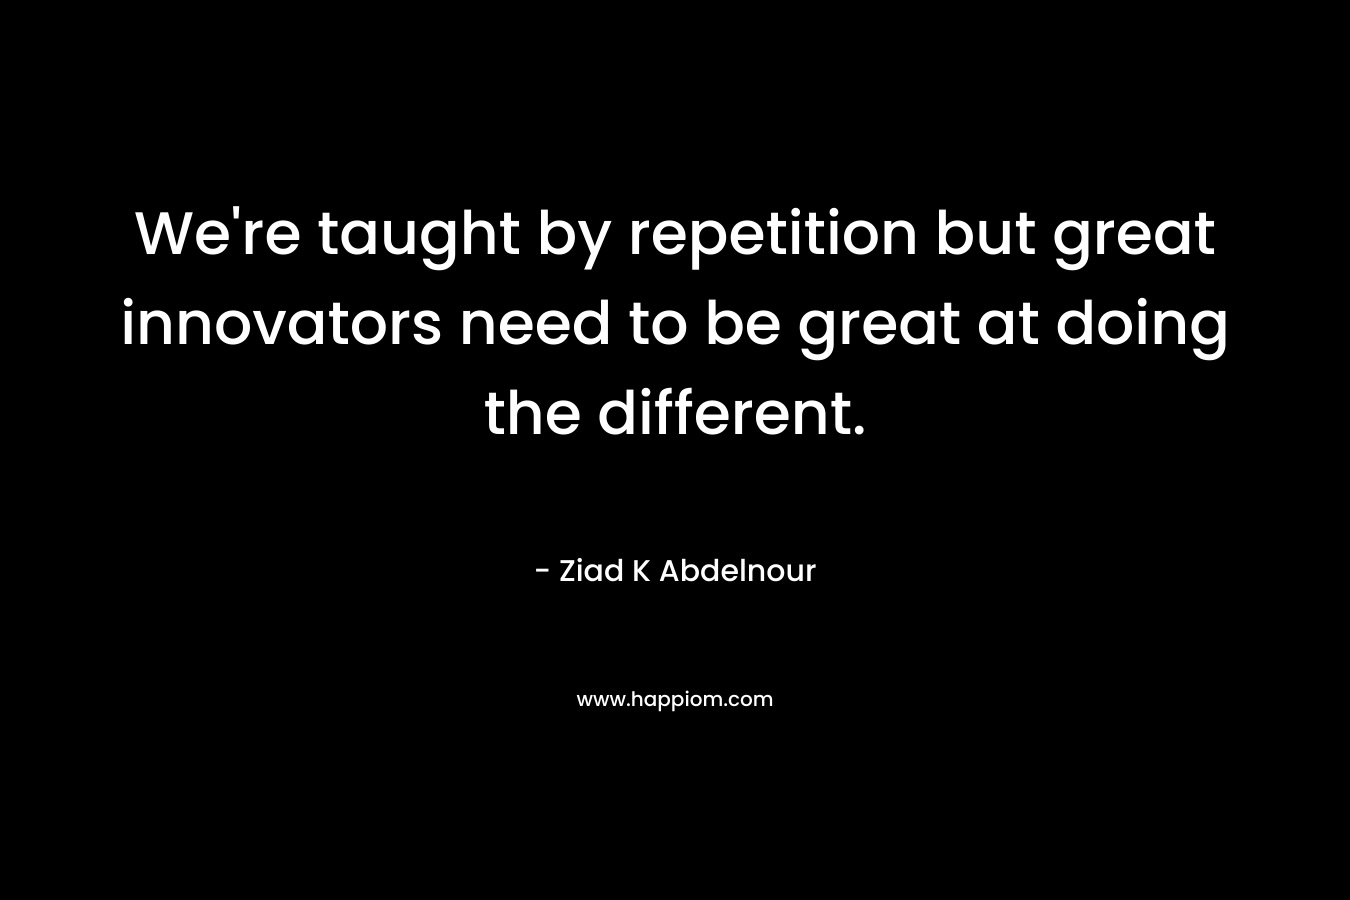 We’re taught by repetition but great innovators need to be great at doing the different. – Ziad K Abdelnour